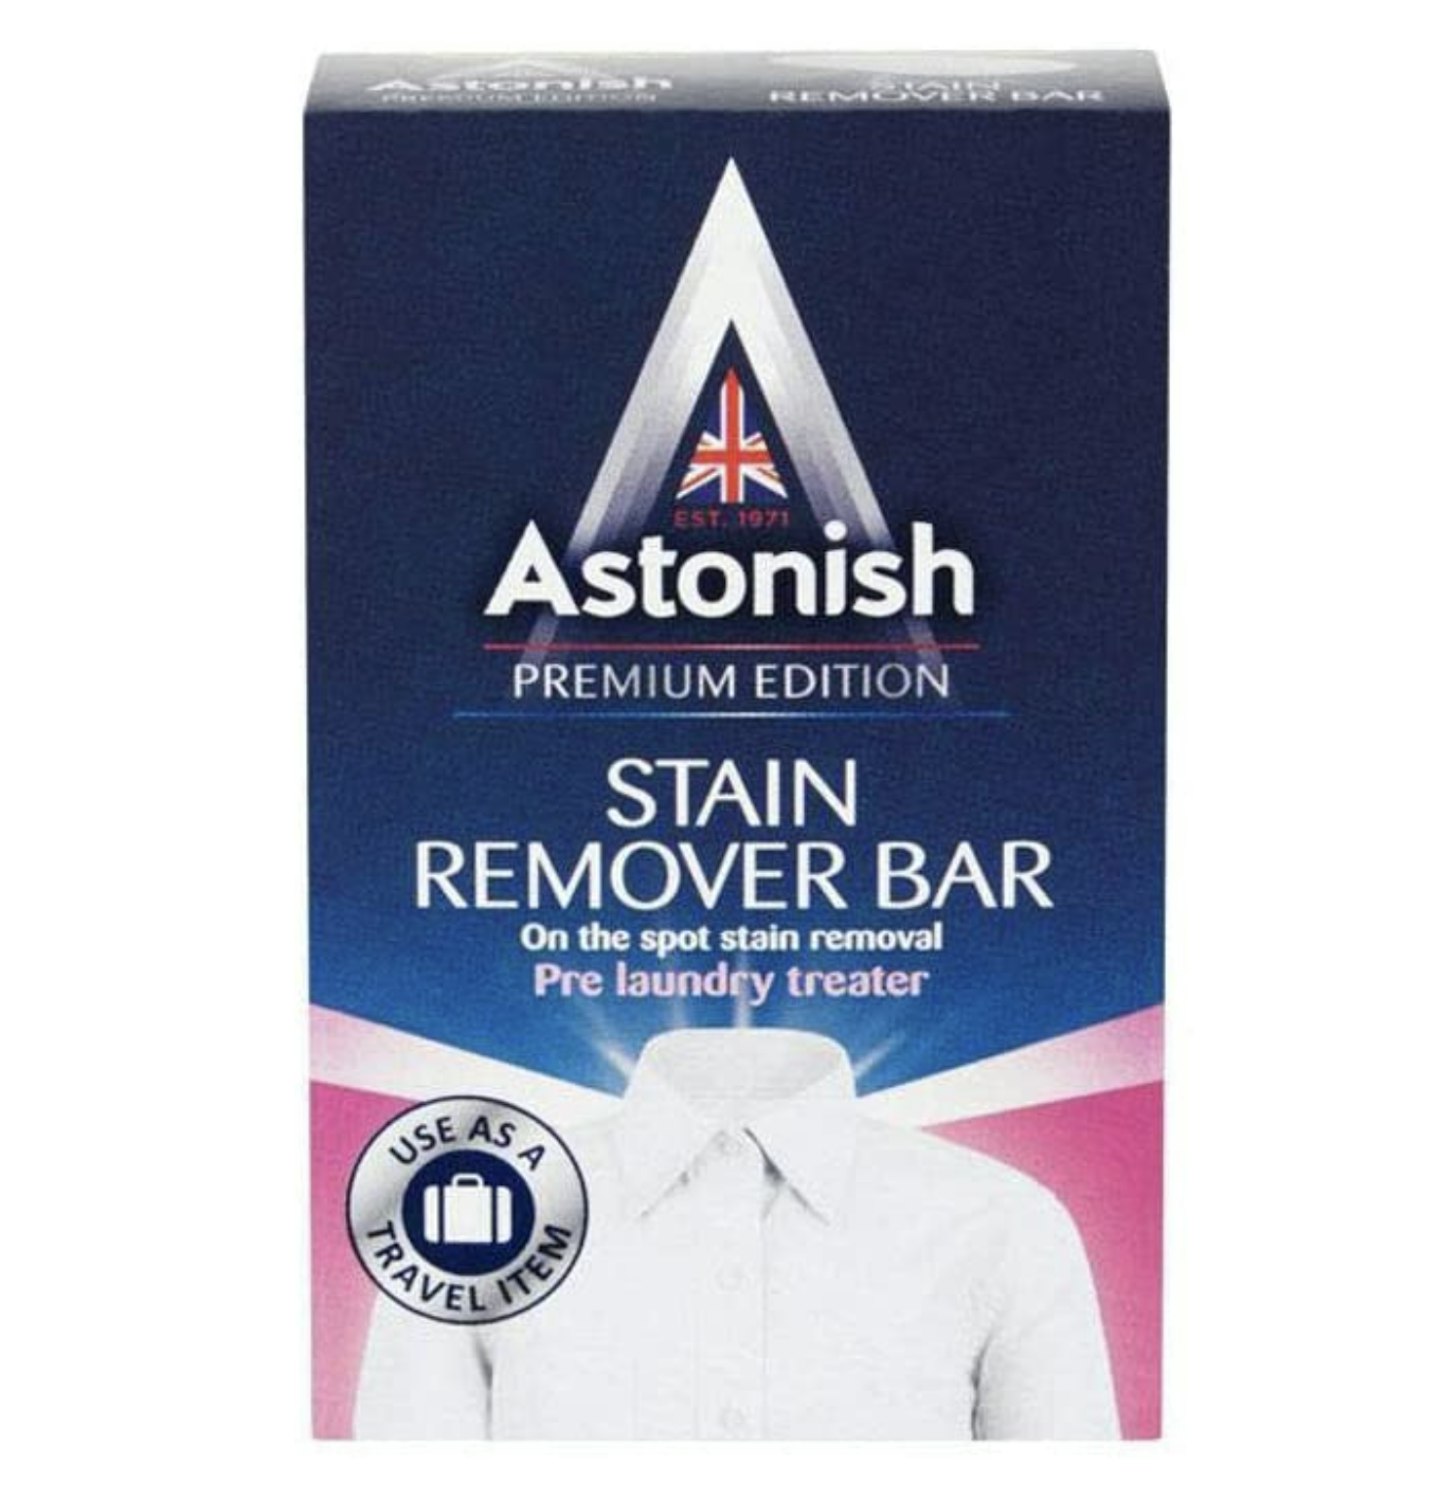 Astonish Stain Remover Bar - Pack of 12